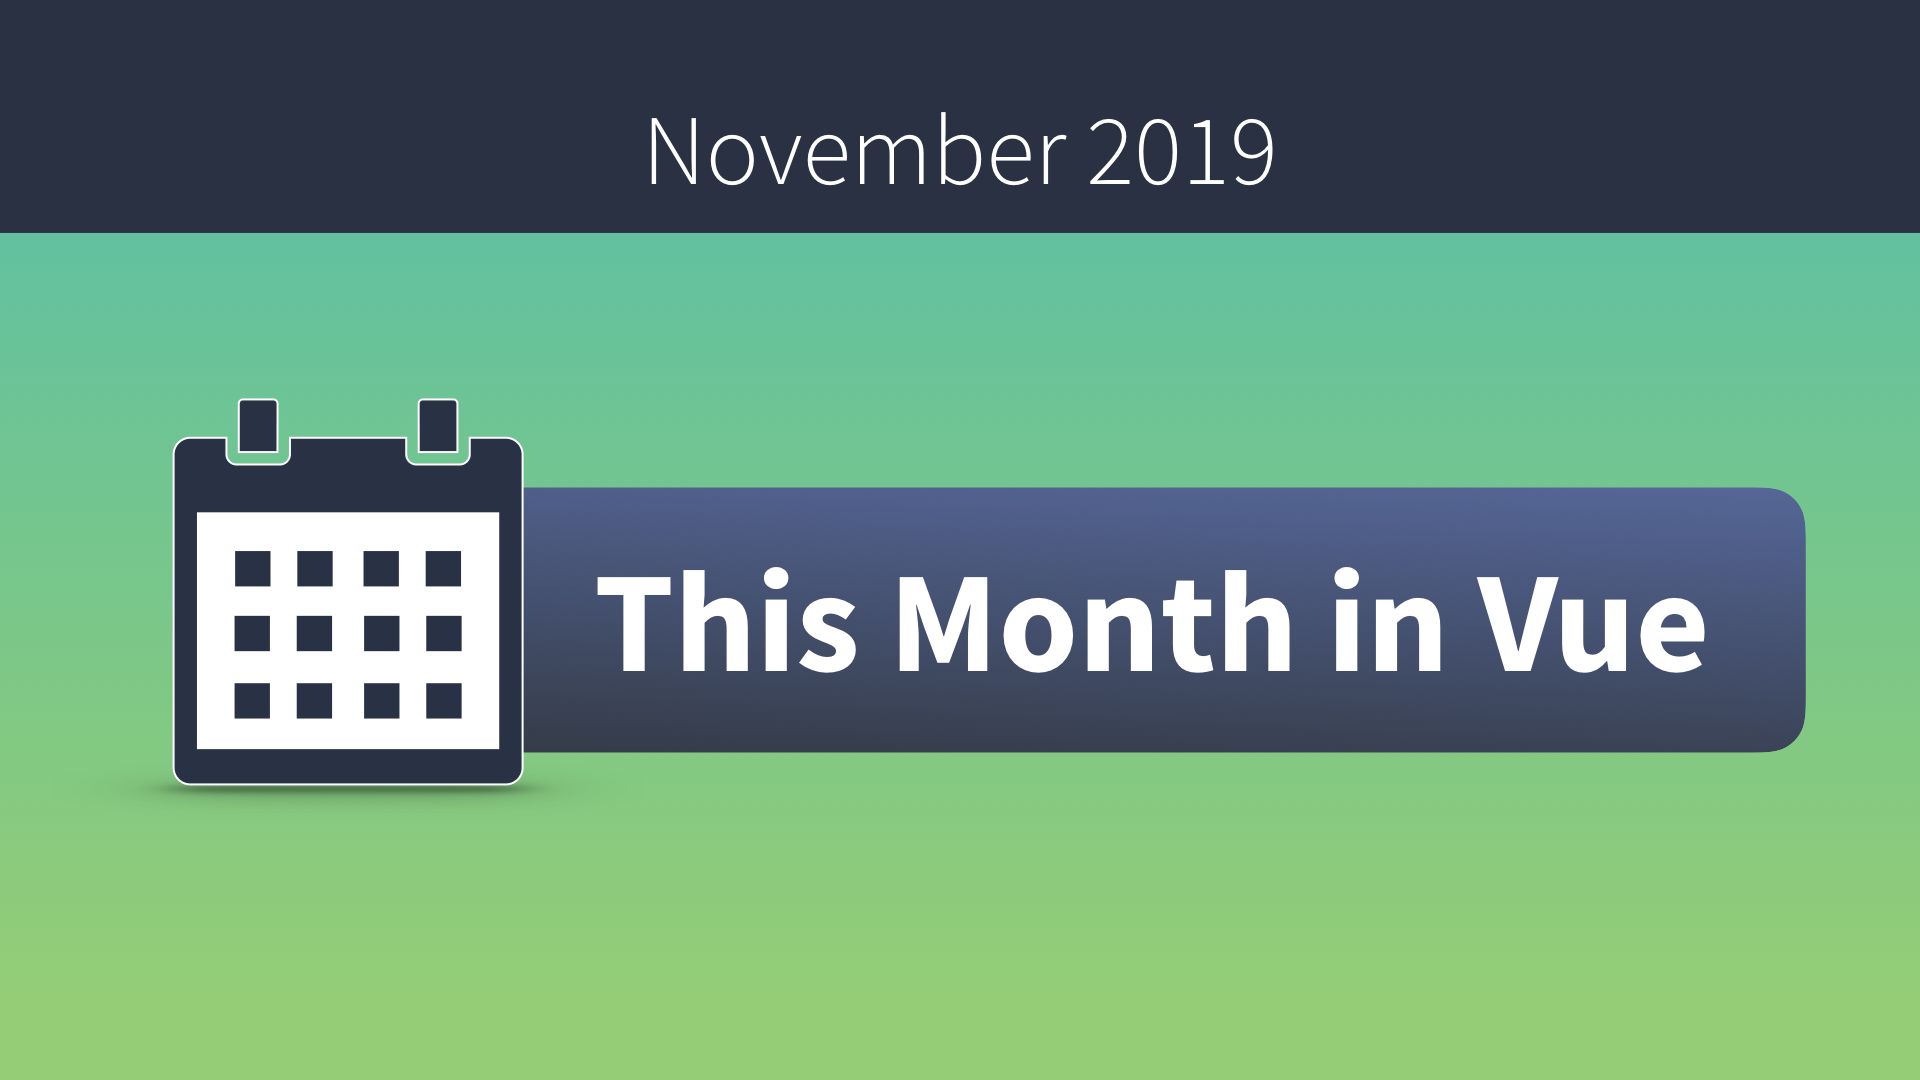 This Month in Vue - November 2019